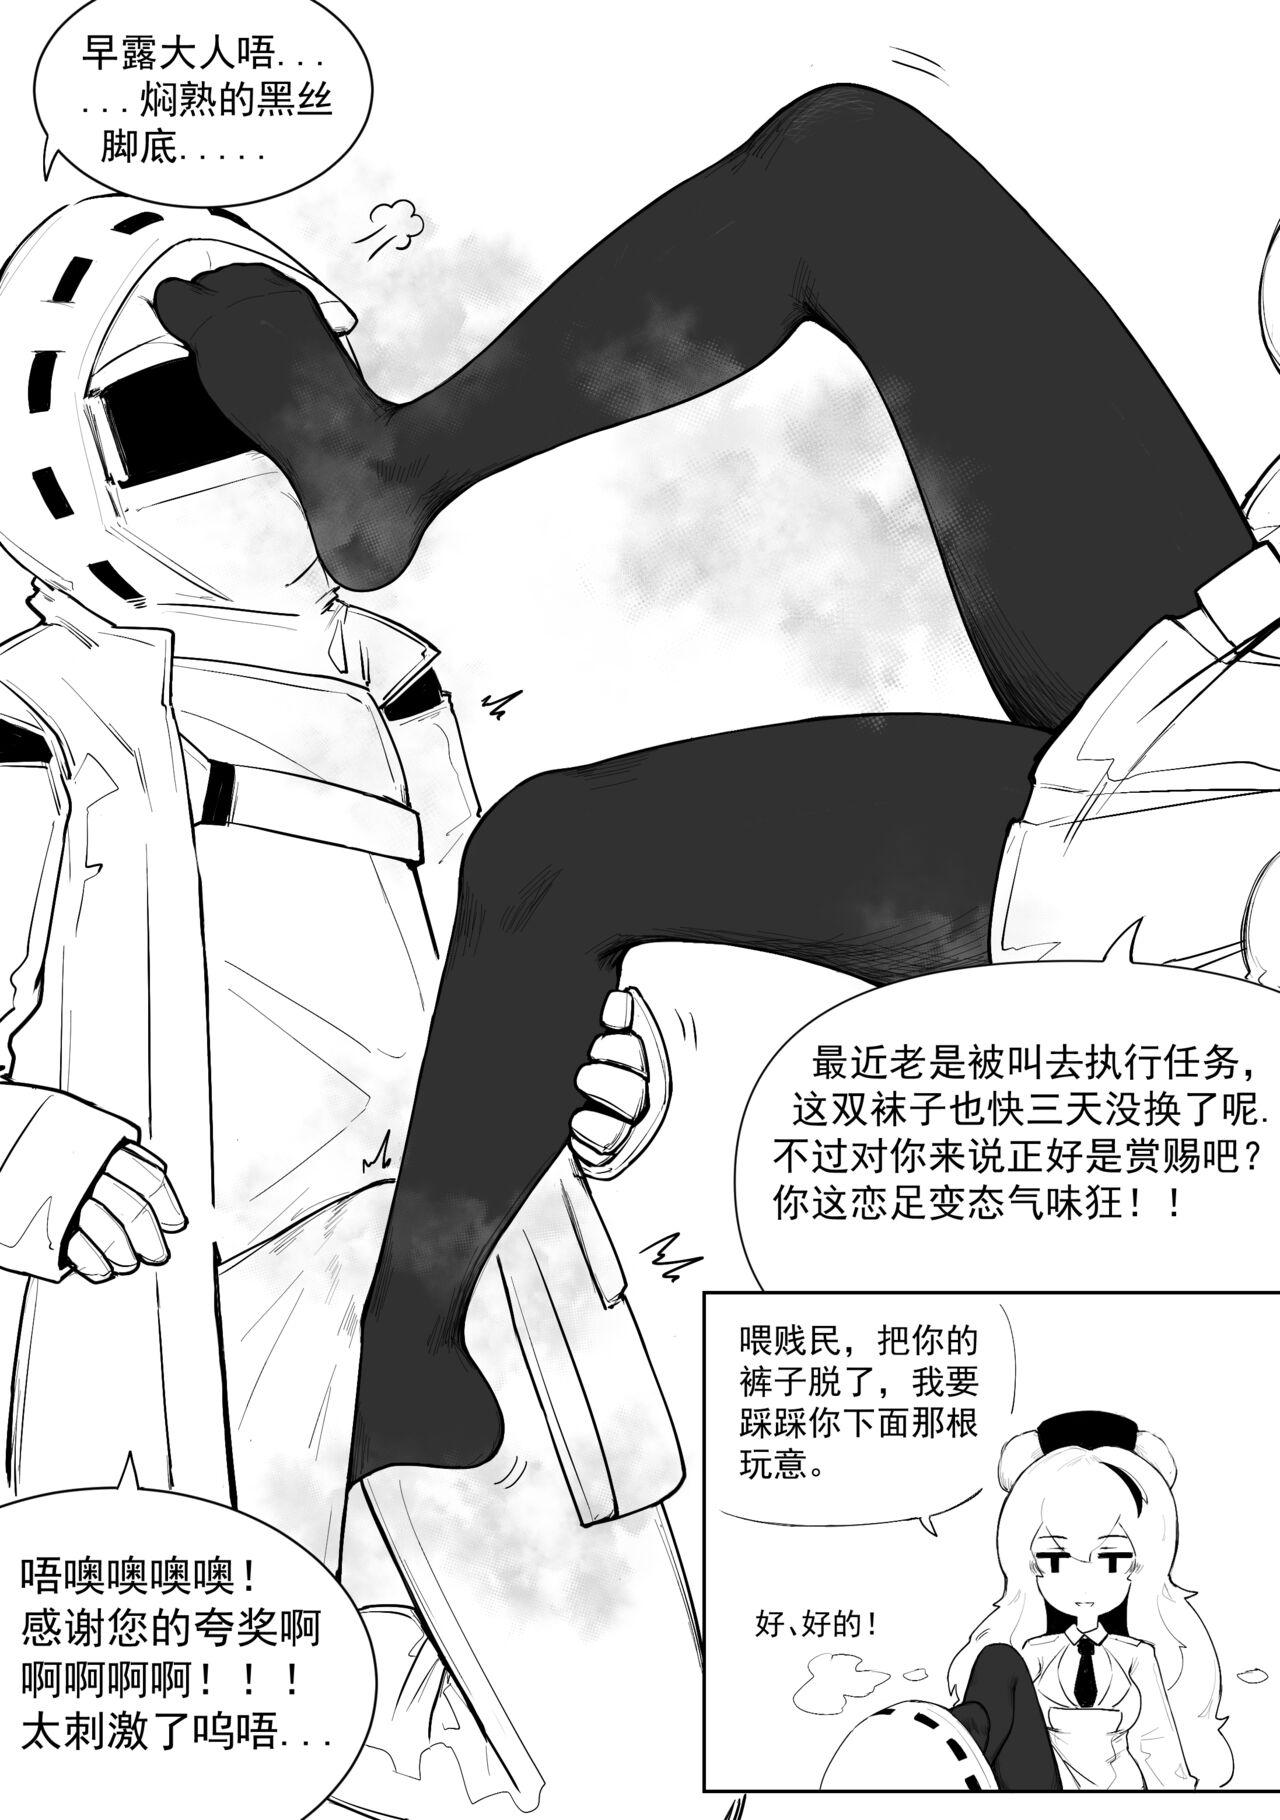 Dance 澄澈之冰 早露 - Arknights Teensex - Page 3